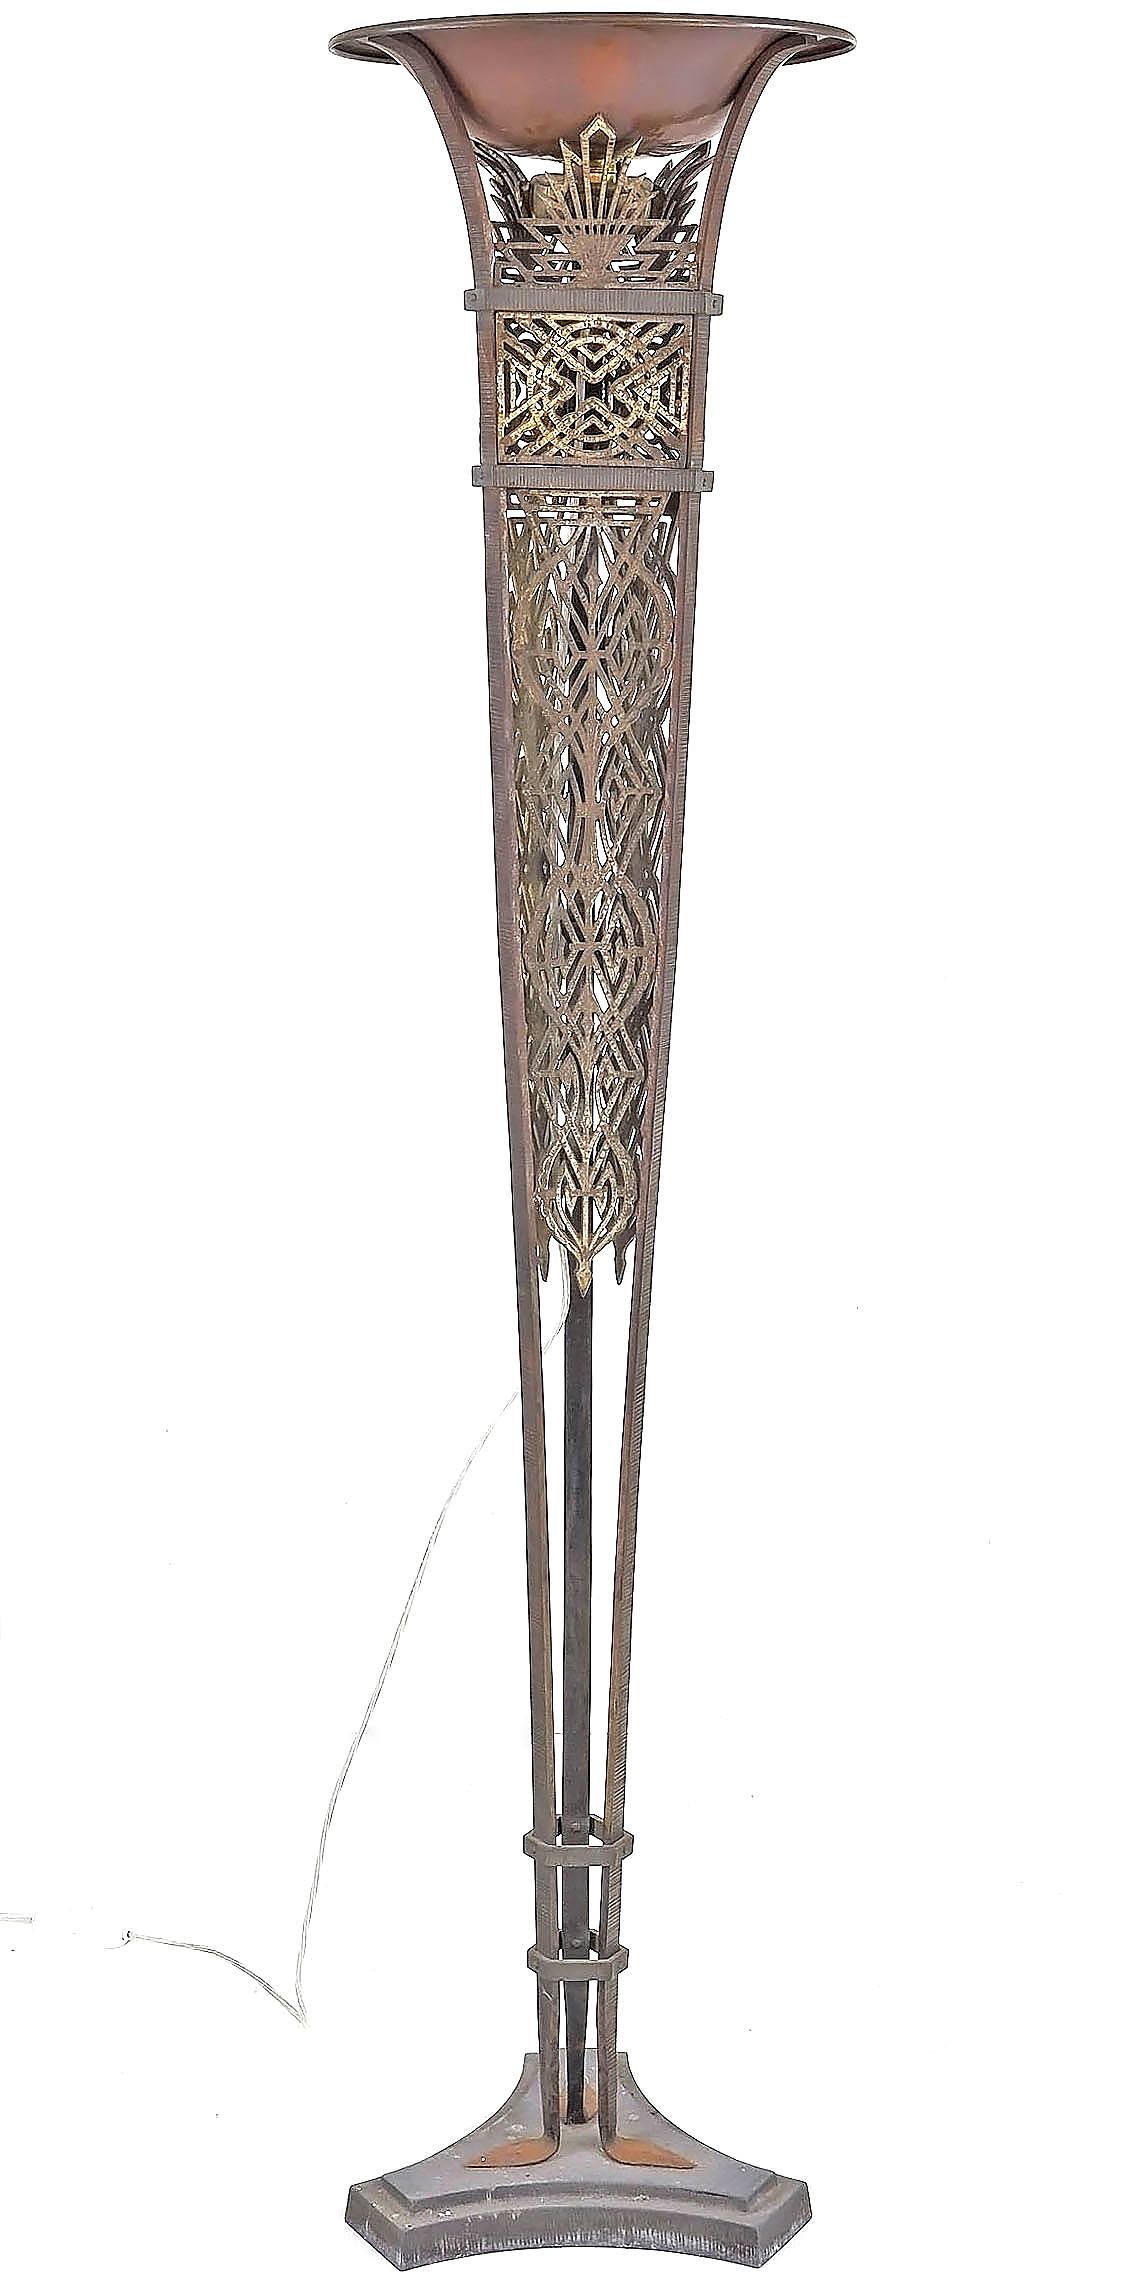 'Superb Period Art Deco Hammered Wrought Iron Torchiere Floor Lamp Inset with Cast Filigree Panels, Circa 1920s'